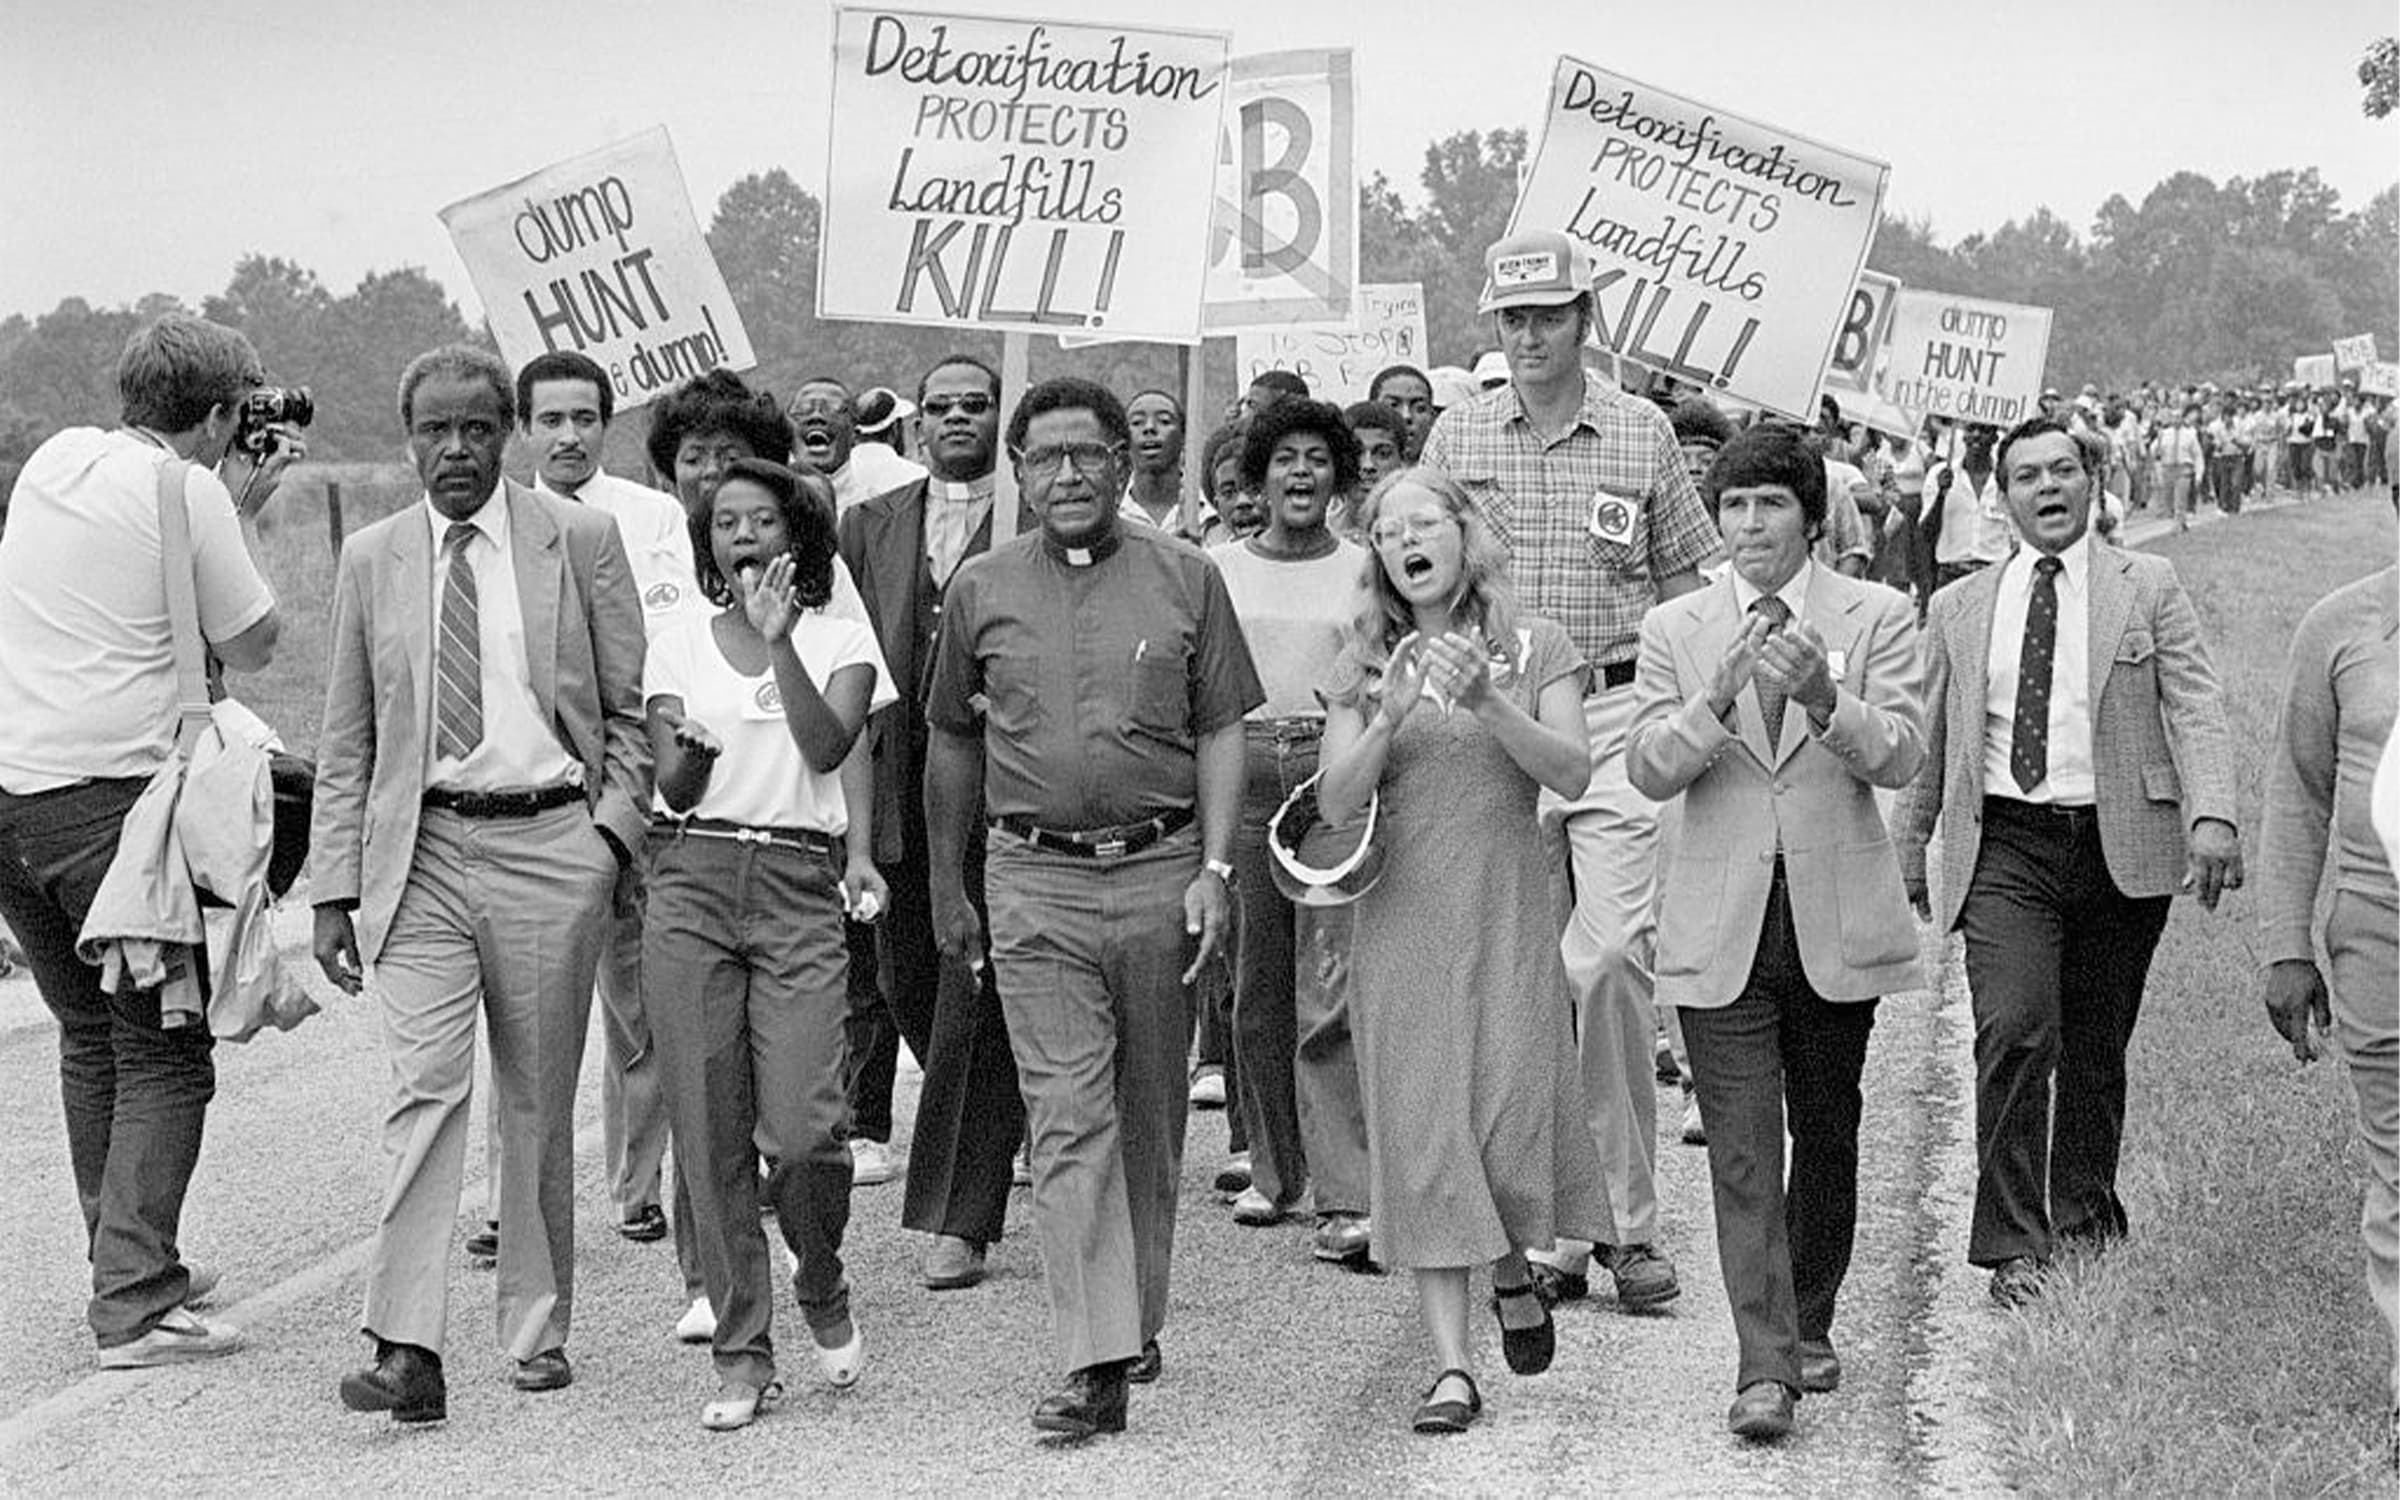 Protesters marching against a PCB landfill in Afton, Warren County, North Carolina, led by Reverend Leon White (second from left), Reverend Joseph Lowery (center), and Ken Ferruccio (second from right). 1982. Getty Images, Bettmann Archive. Photograph: Otto Ludwig Bettmann